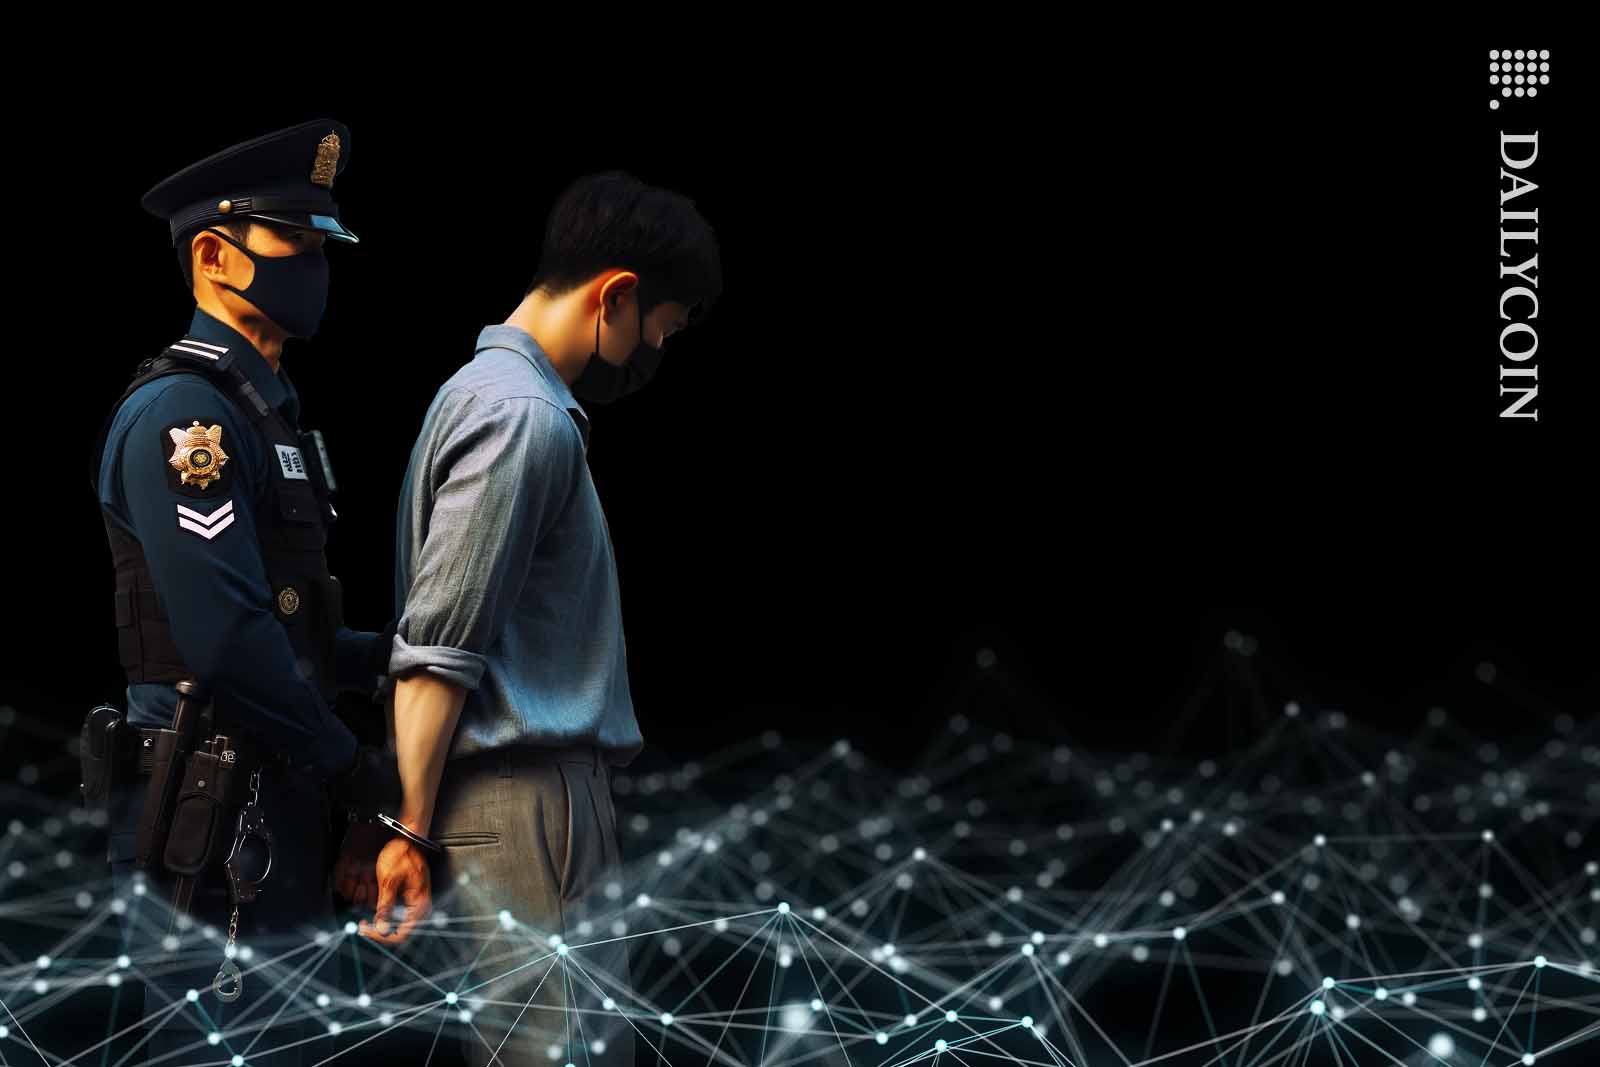 Man being arrested in a digital environment.